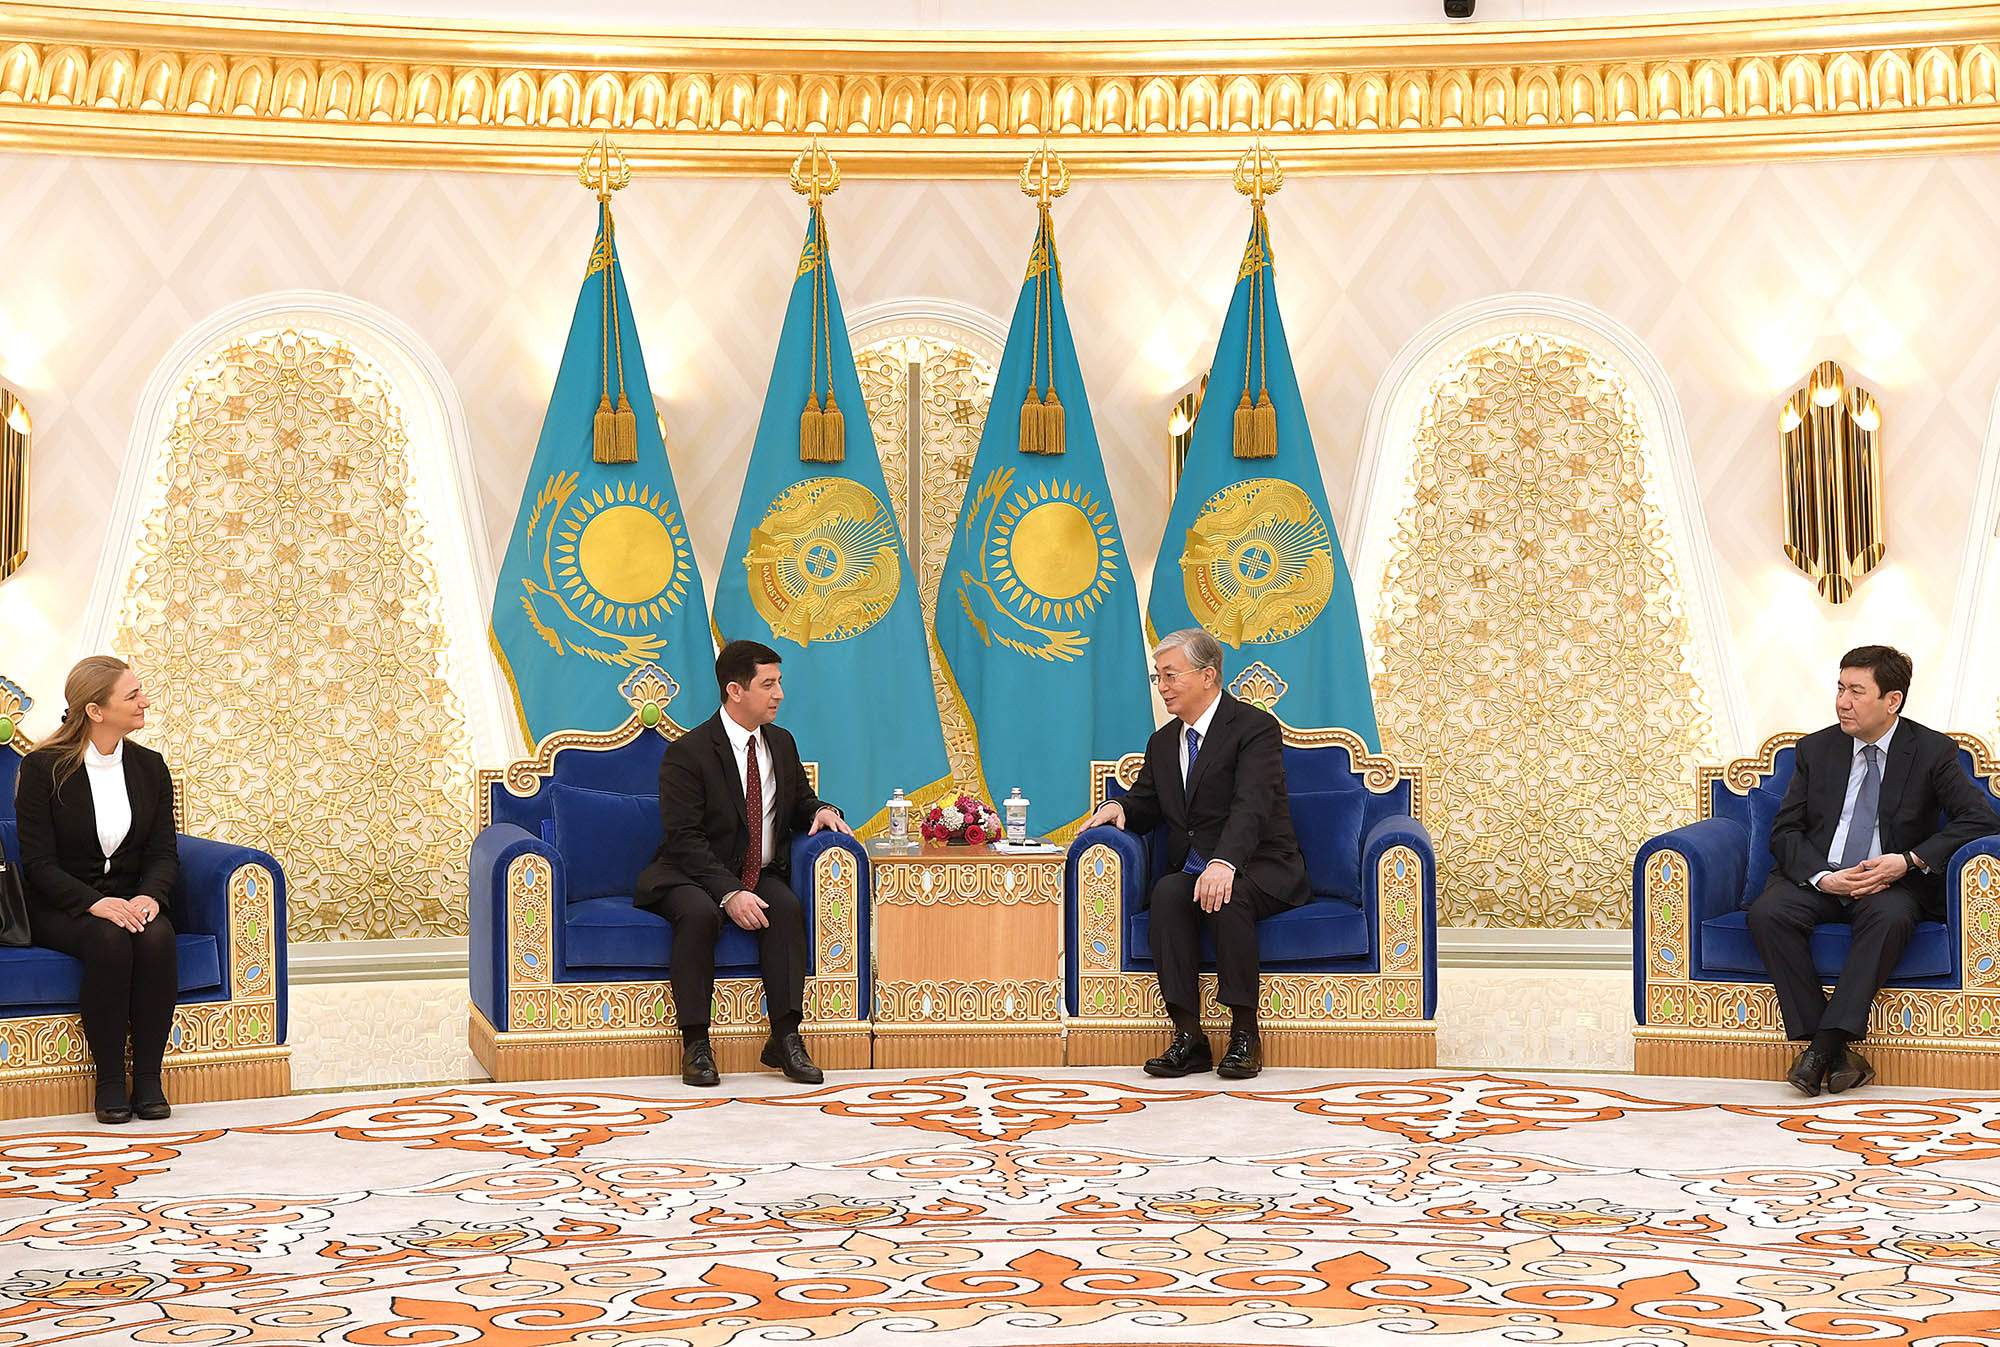 President Tokayev receives Credentials from ambassadors of different states